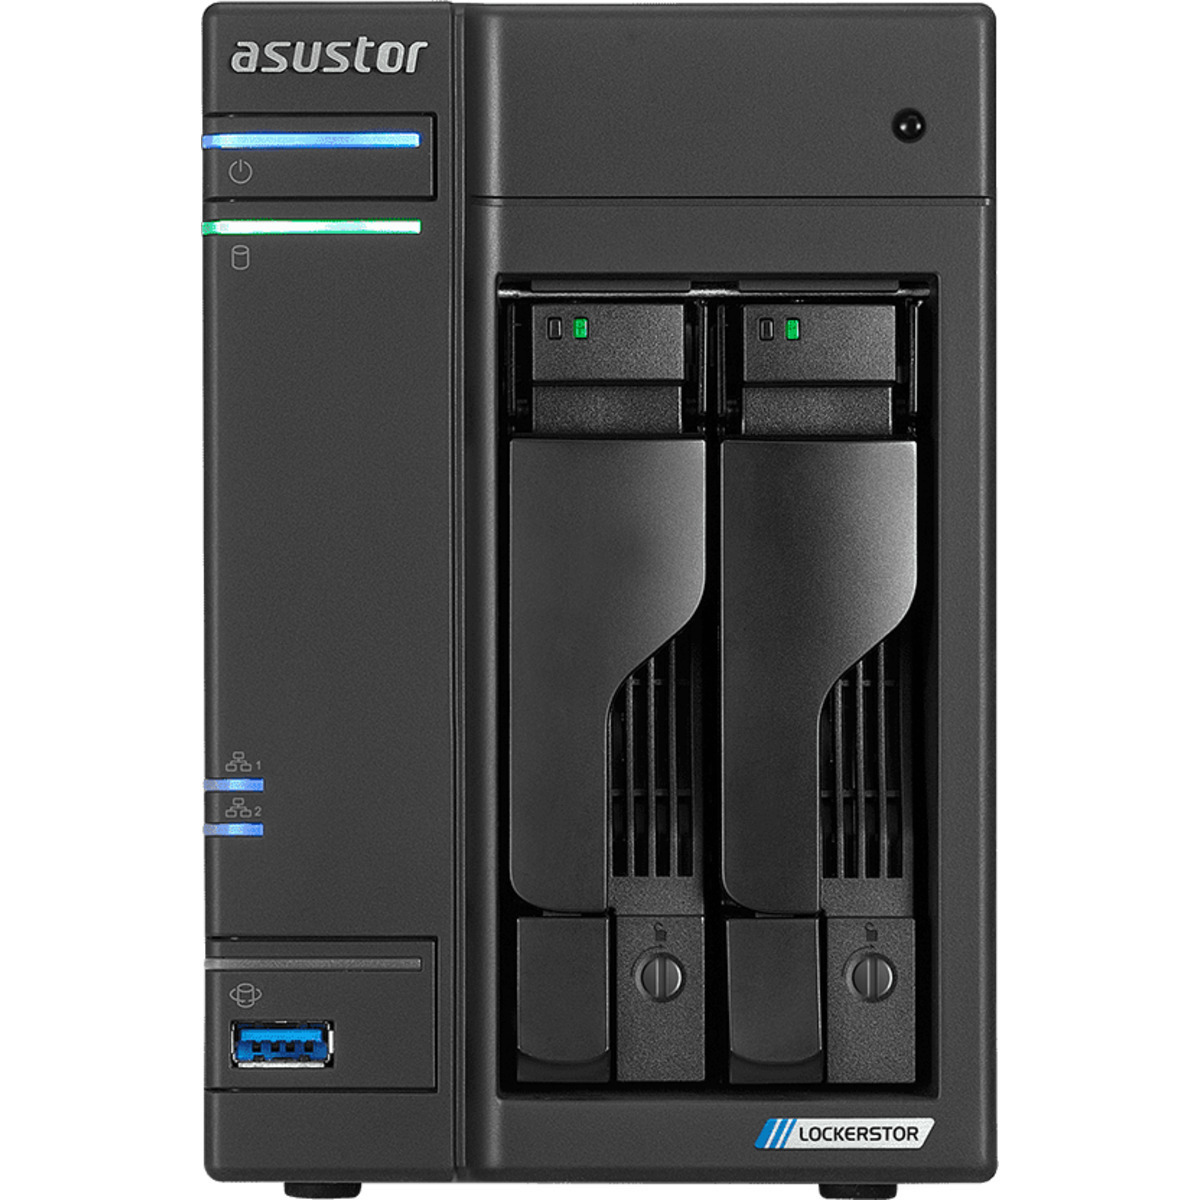 buy $978 ASUSTOR AS6602T Lockerstor 2 16tb Desktop NAS - Network Attached Storage Device 2x8000gb Seagate IronWolf ST8000VN004 3.5 7200rpm SATA 6Gb/s HDD NAS Class Drives Installed - Burn-In Tested - FREE RAM UPGRADE - nas headquarters buy network attached storage server device das new raid-5 free shipping usa christmas new year holiday sale AS6602T Lockerstor 2